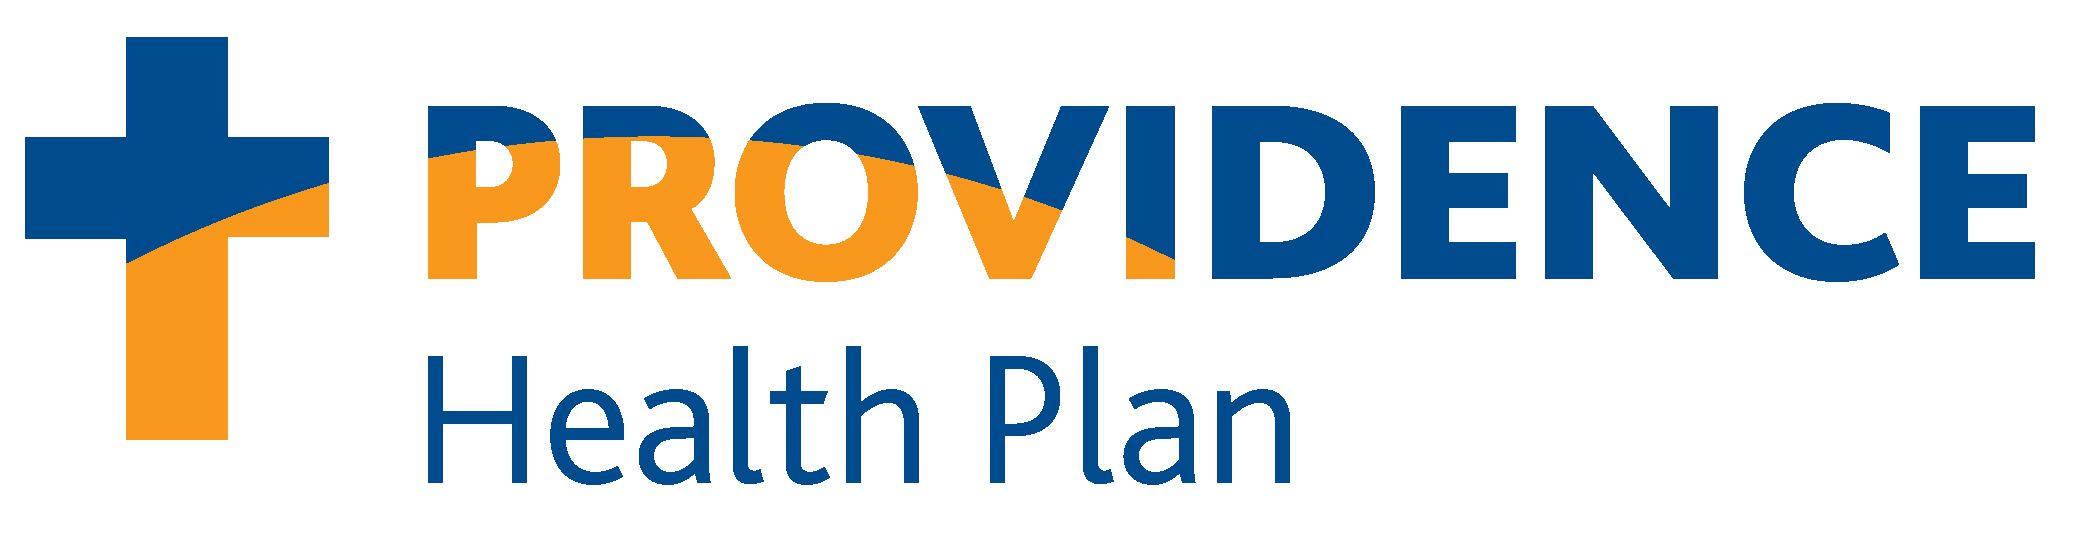 Providence Health Plan Broadway Medical Clinic